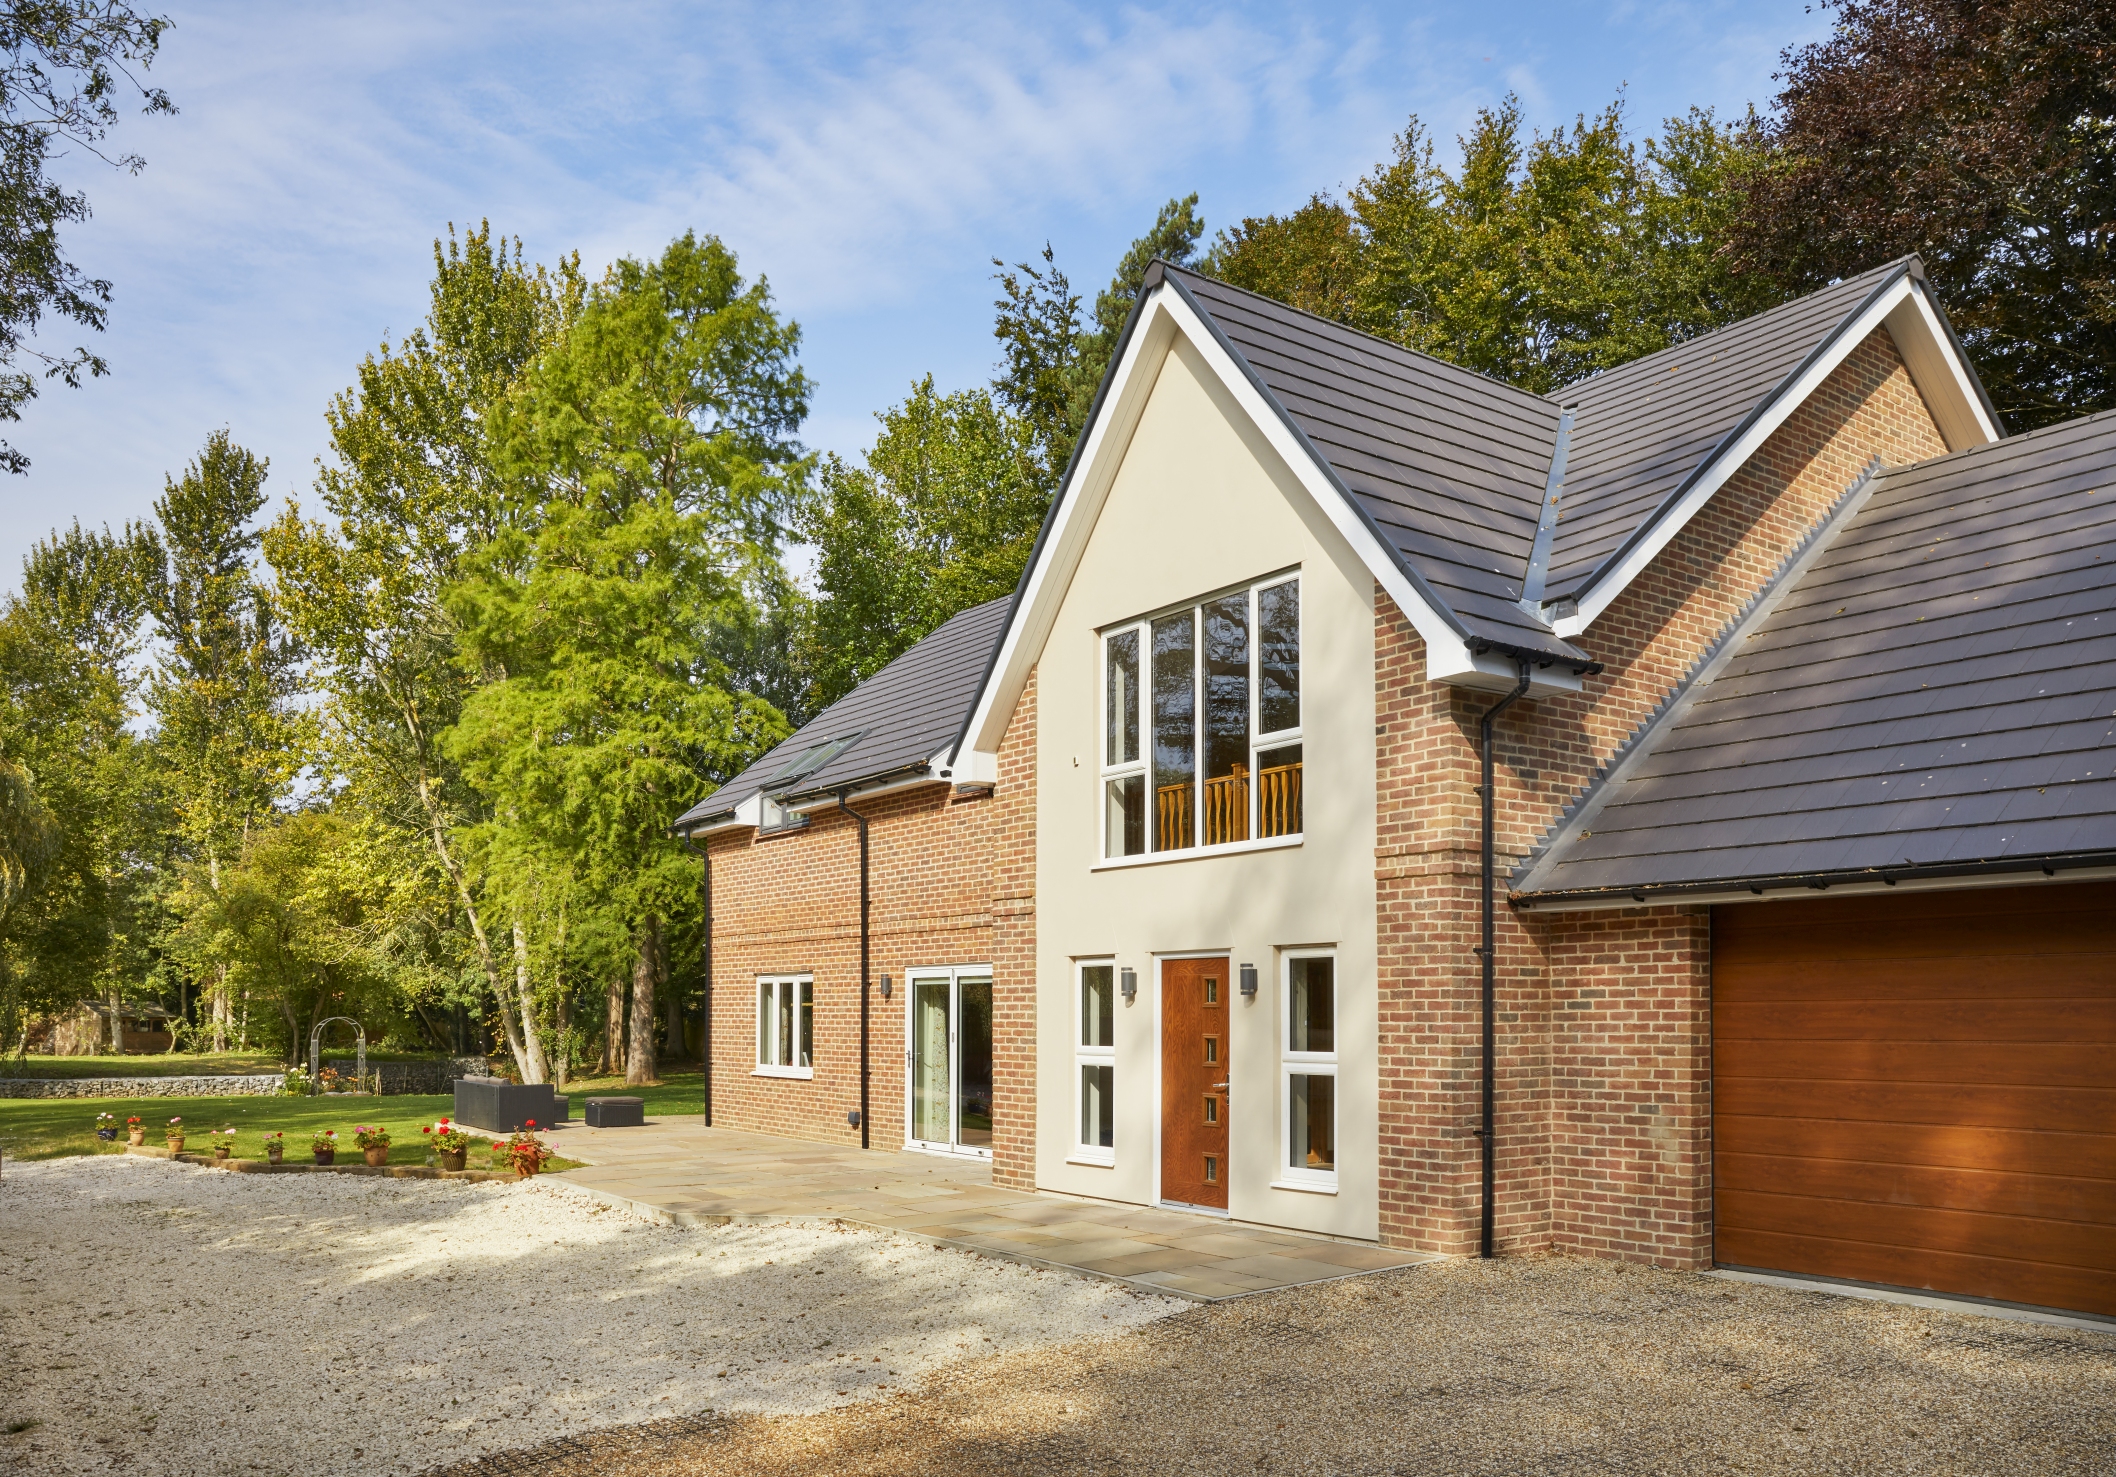 Kingspan Timber Solutions for Home Designer and Architect @KingspanTS